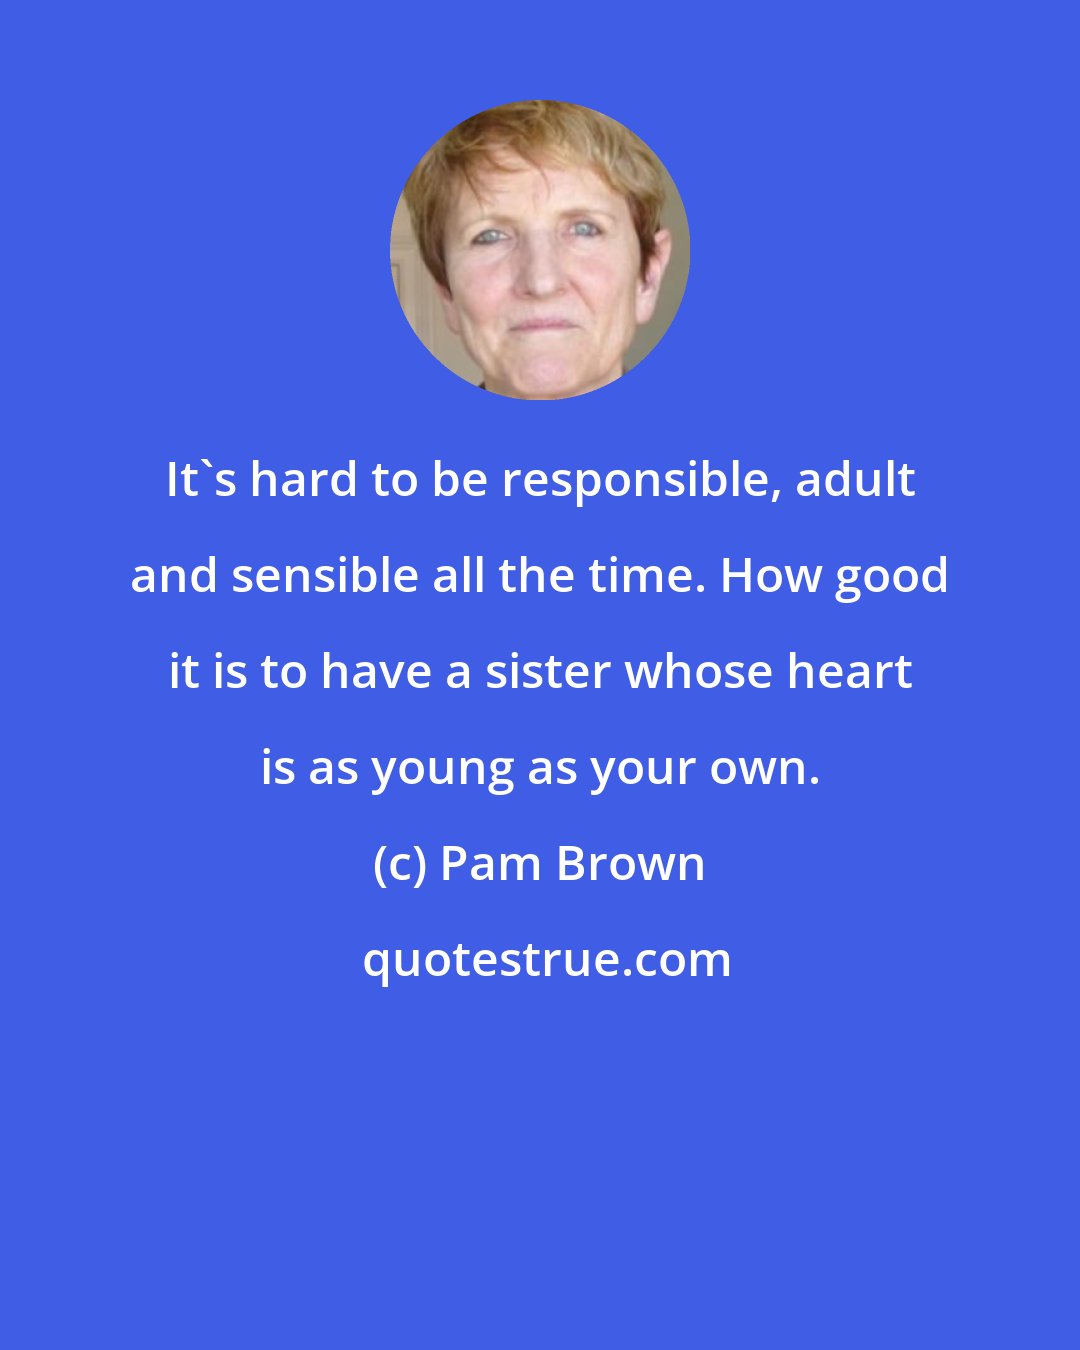 Pam Brown: It's hard to be responsible, adult and sensible all the time. How good it is to have a sister whose heart is as young as your own.